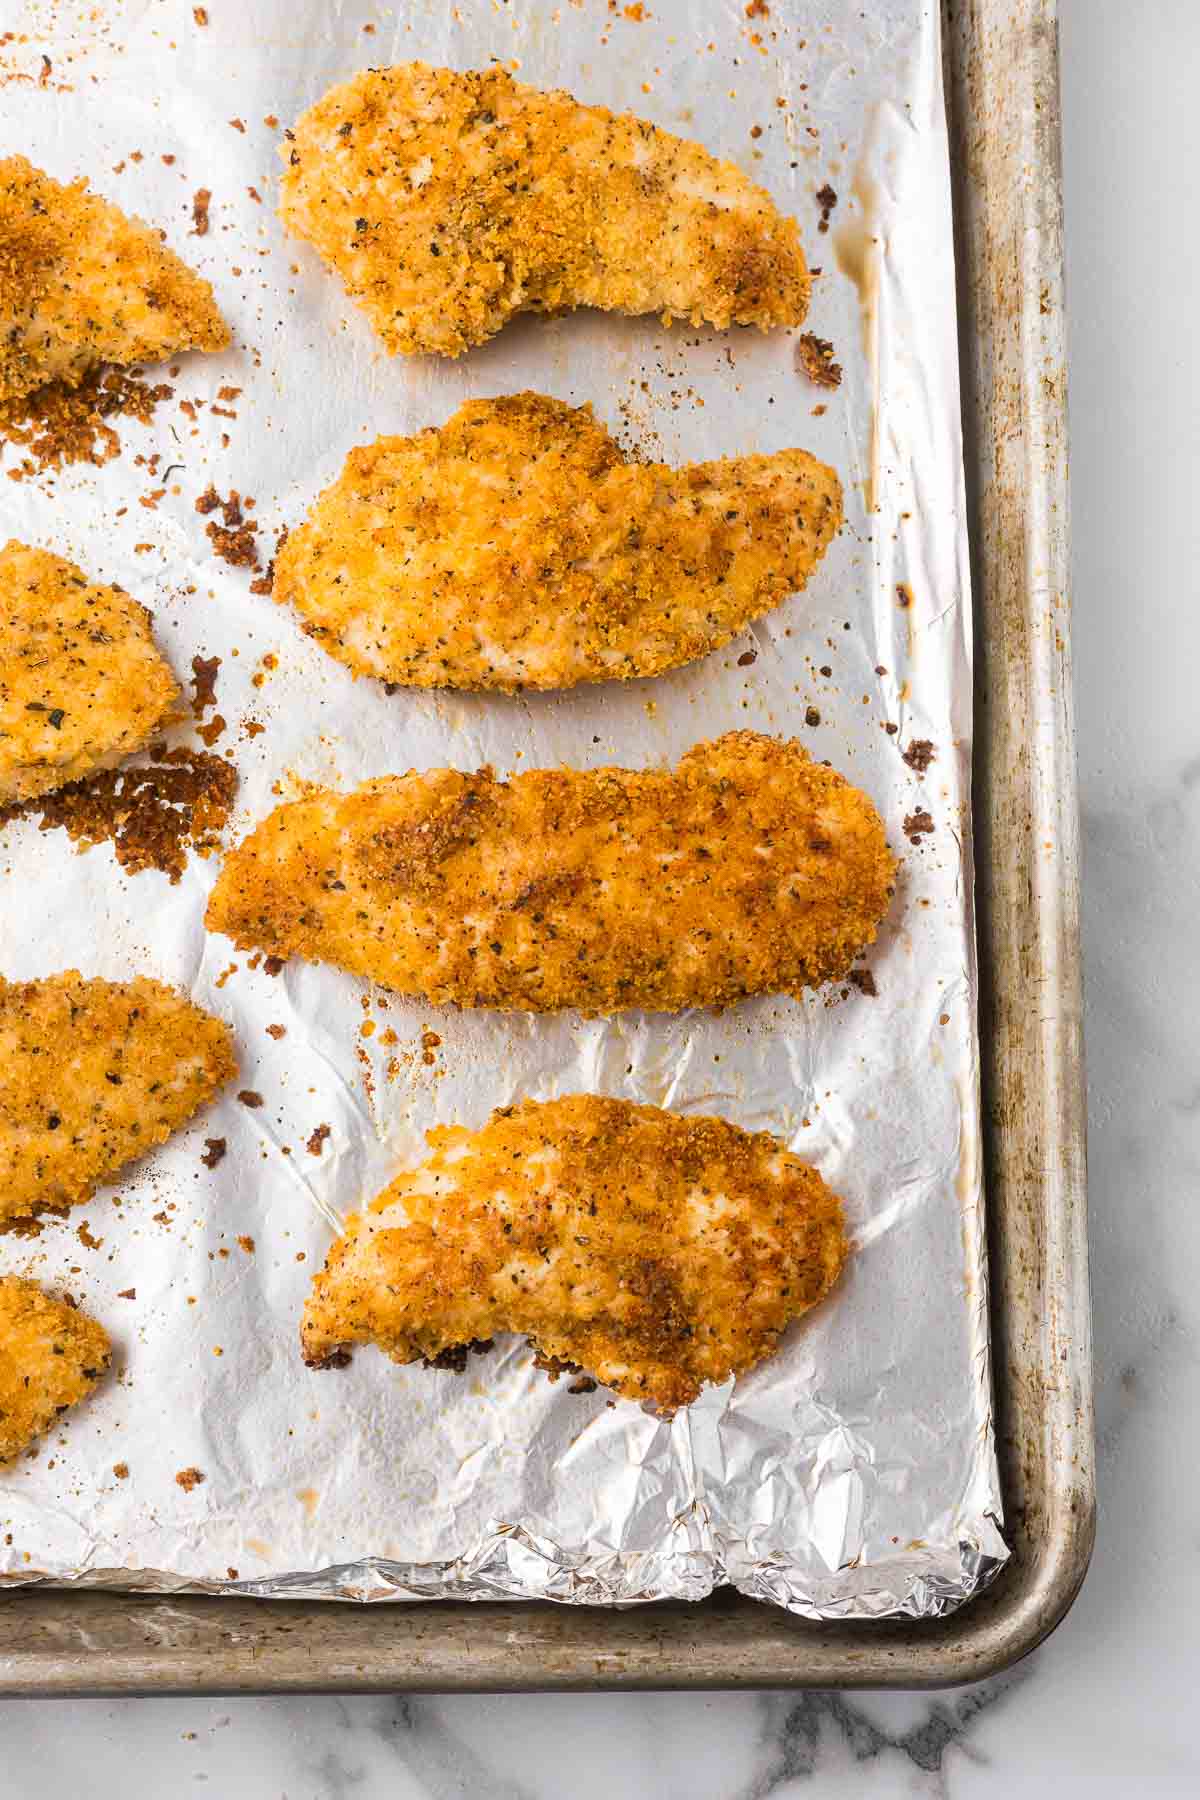 Chicken tenders coated in parmesan cheese and panko breadcrumbs after they have cooked on a sheet pan.